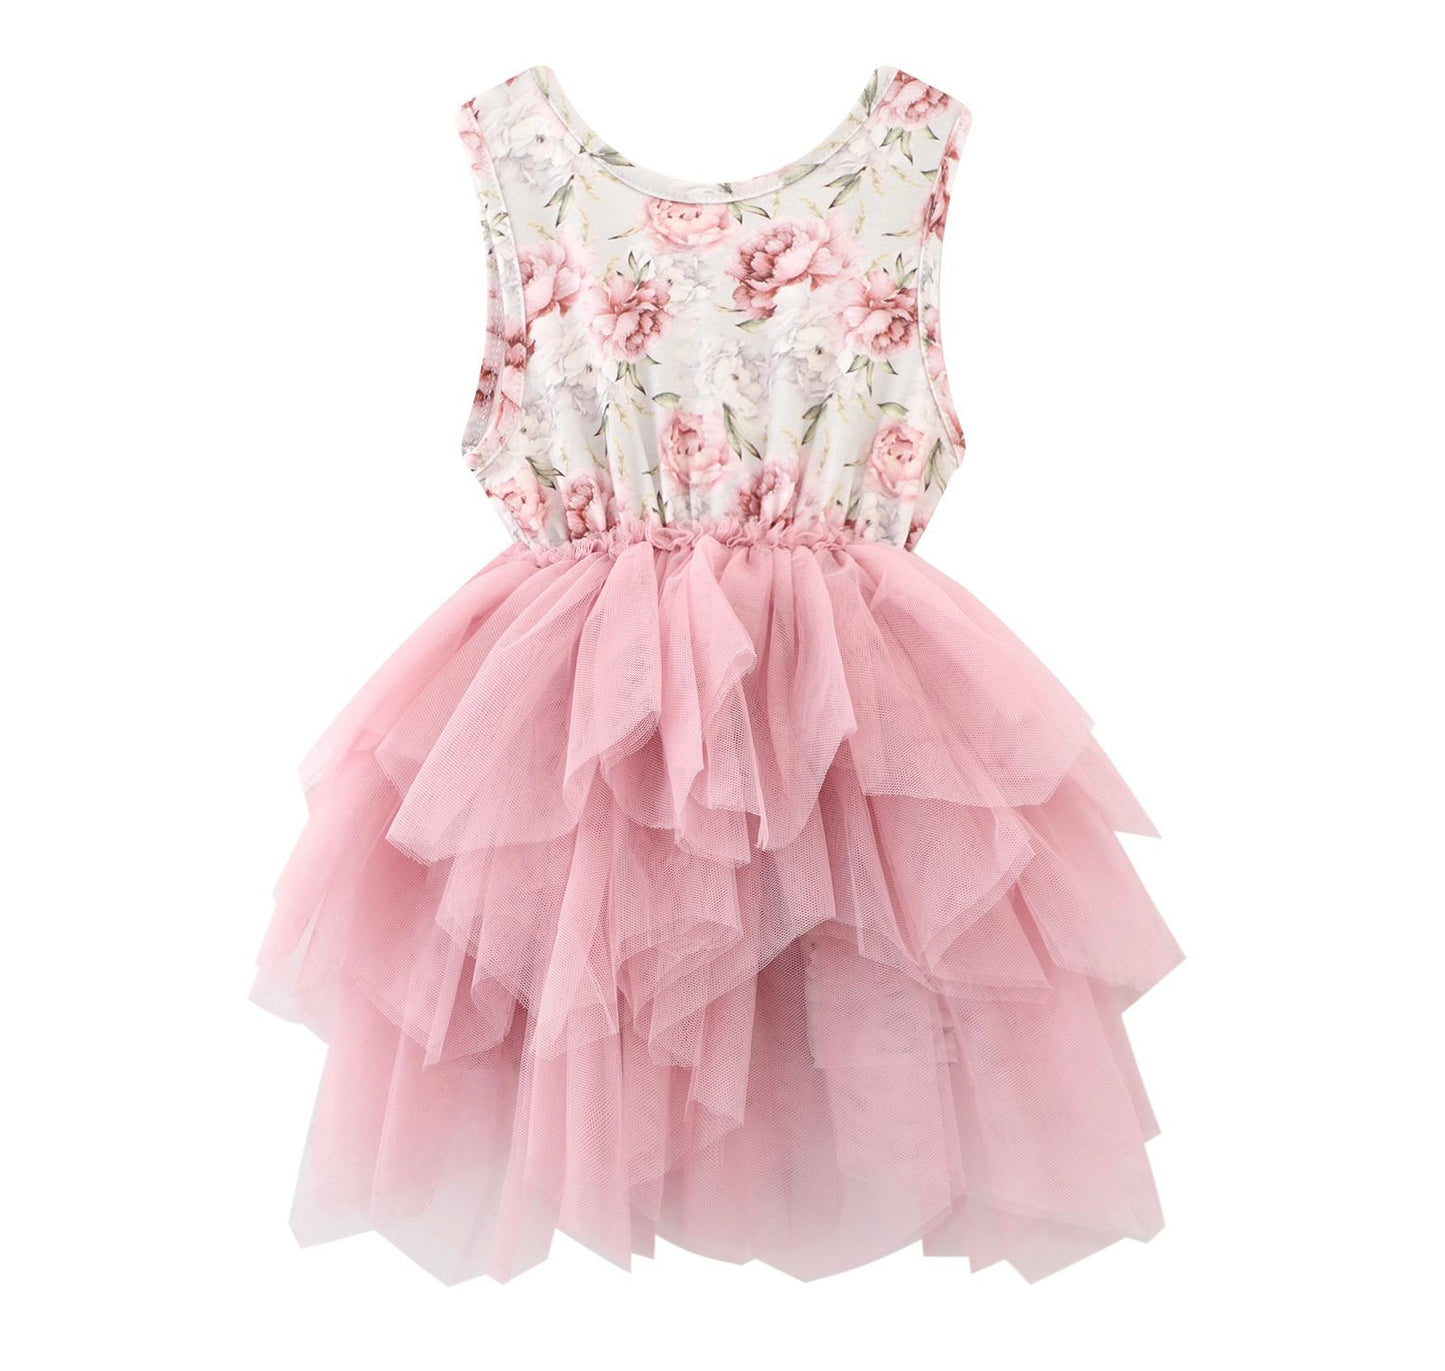 Lilly floral tutu